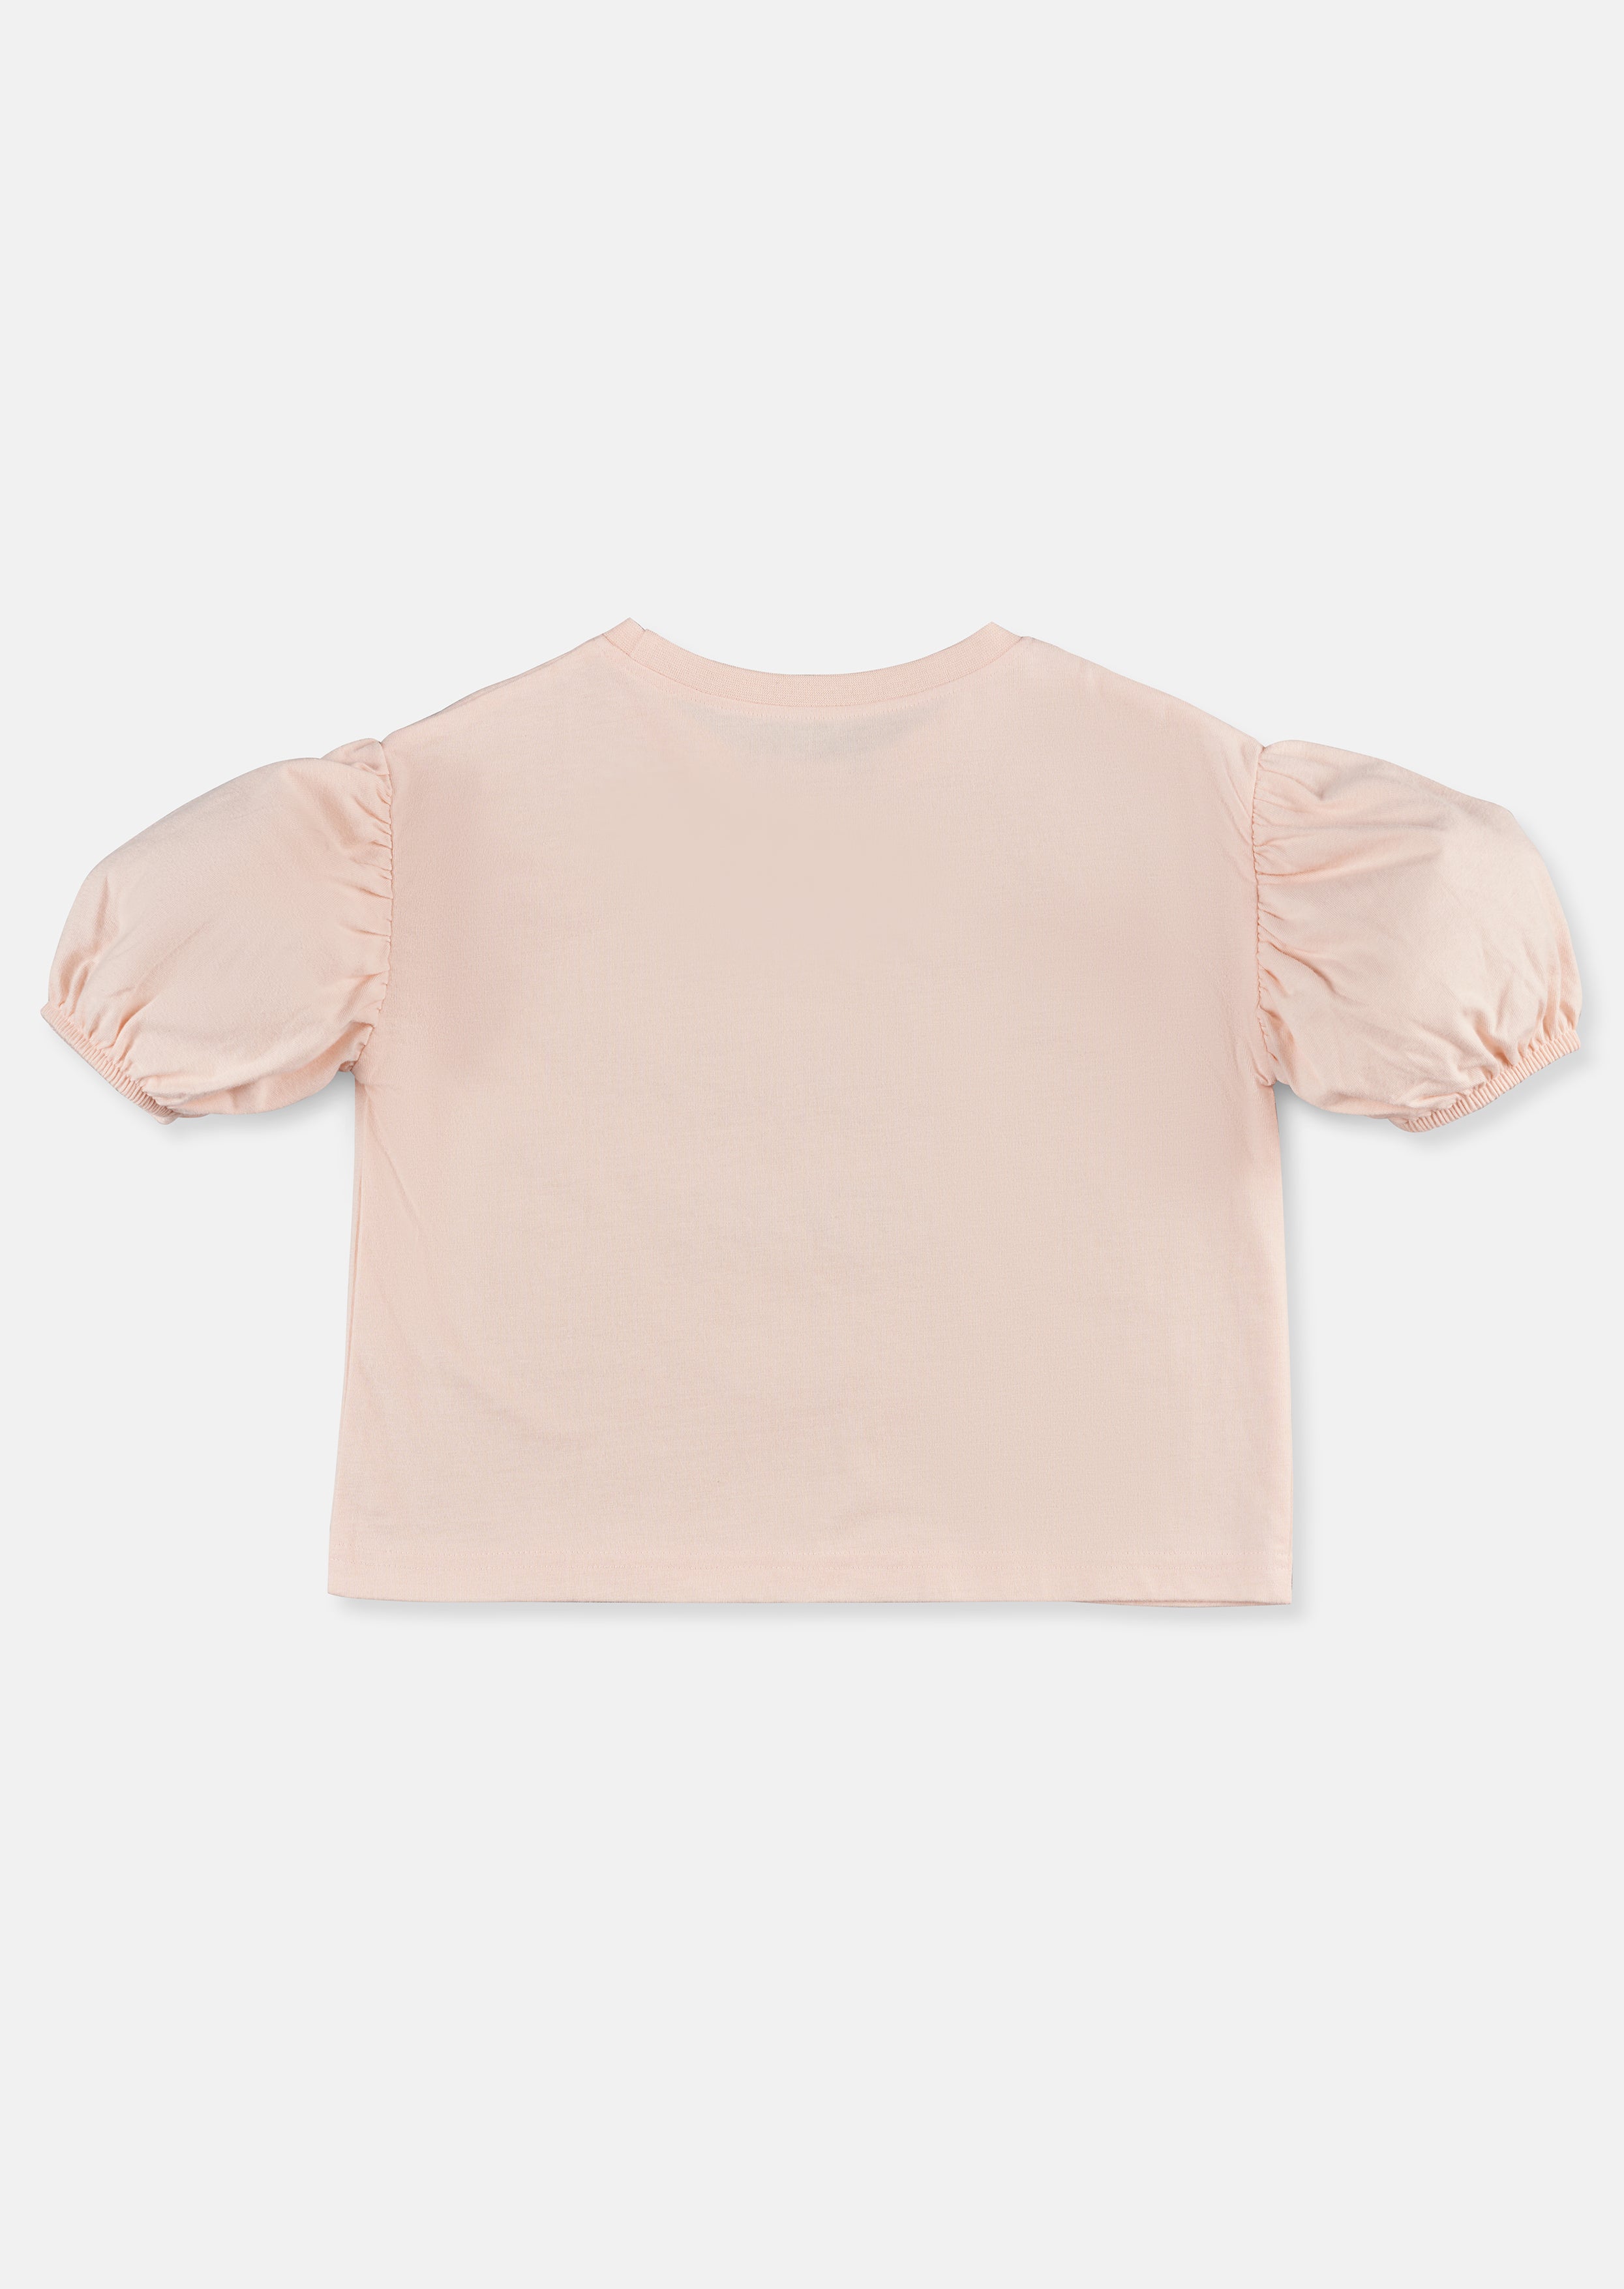 Girls Cotton Pink T-Shirt with Balloon Sleeves